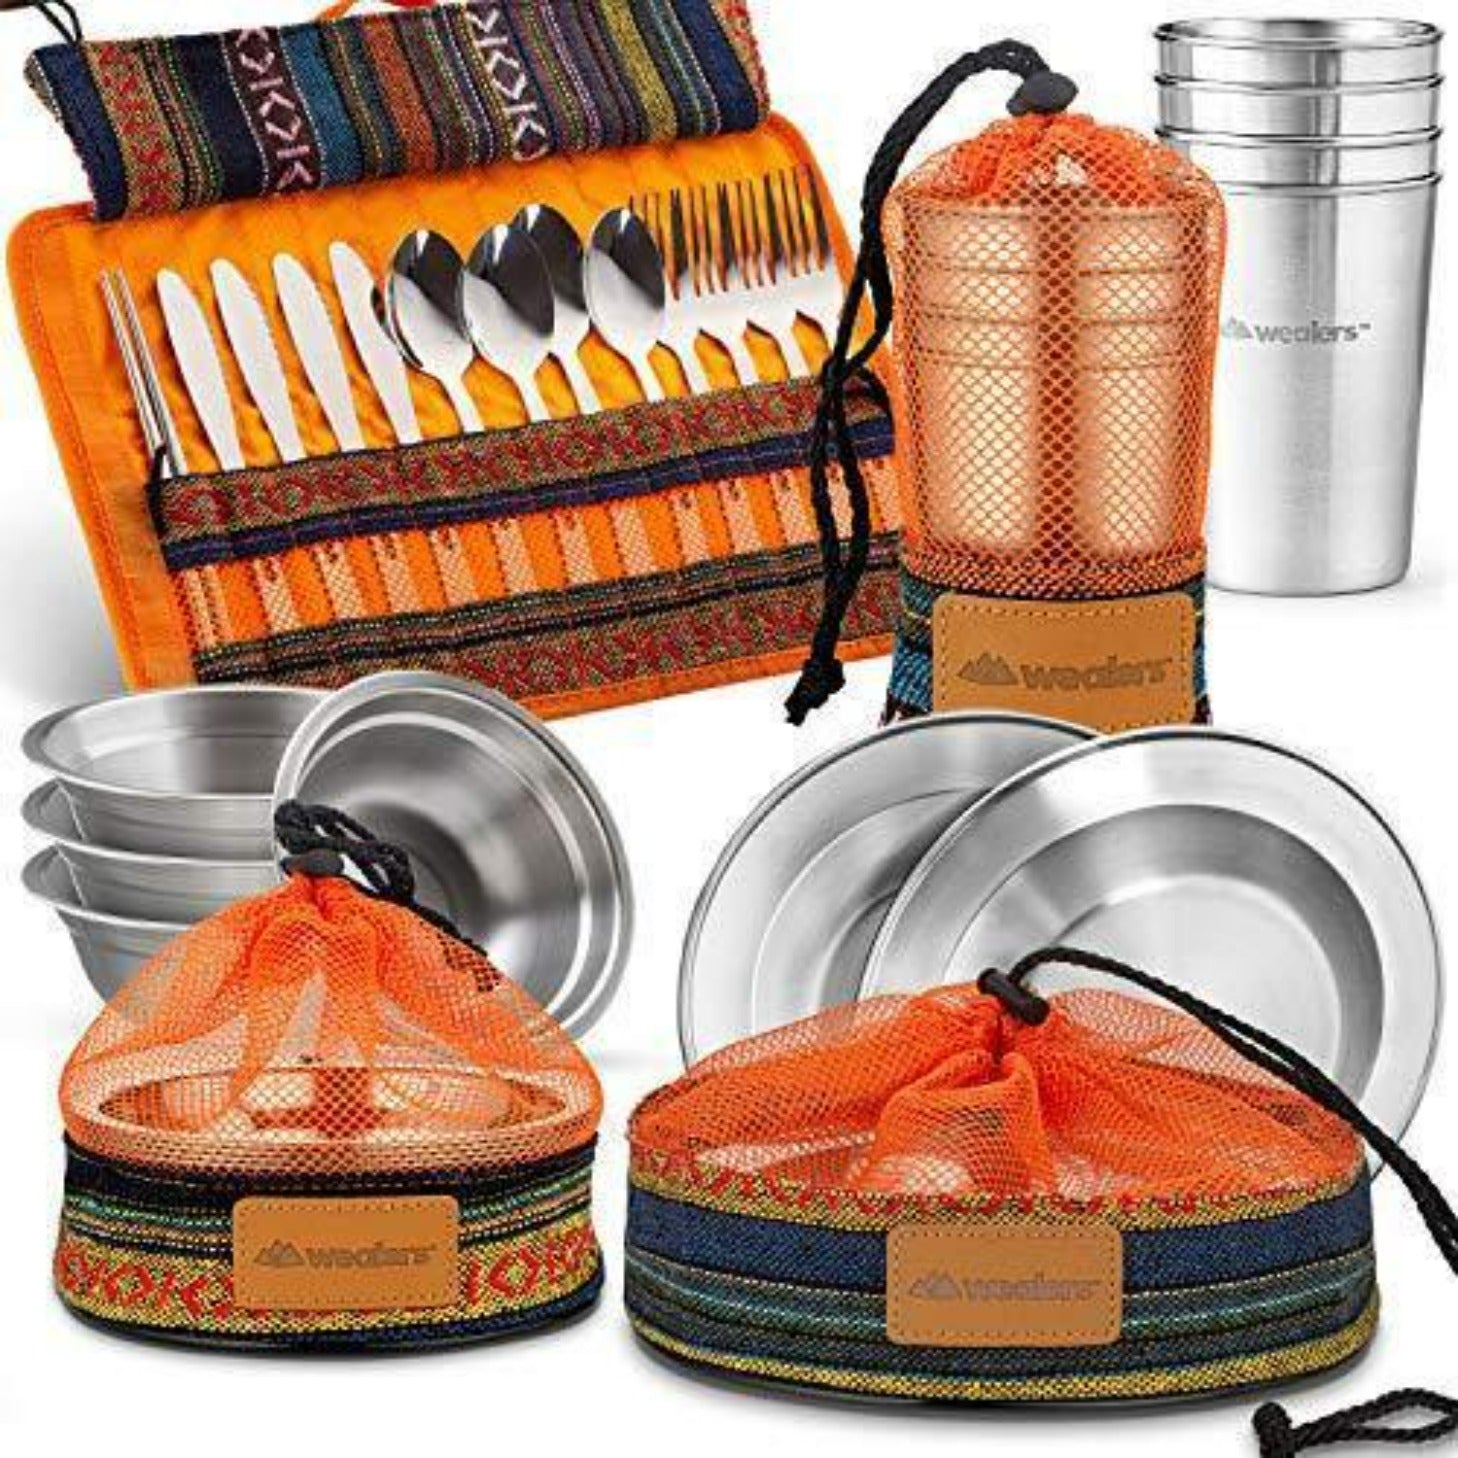 Wealers Stainless Steel Plates and Bowls Camping Set Small and Large  Dinnerware for Kids, Adults, Family, Camping, Hiking, Beach, Outdoor Use